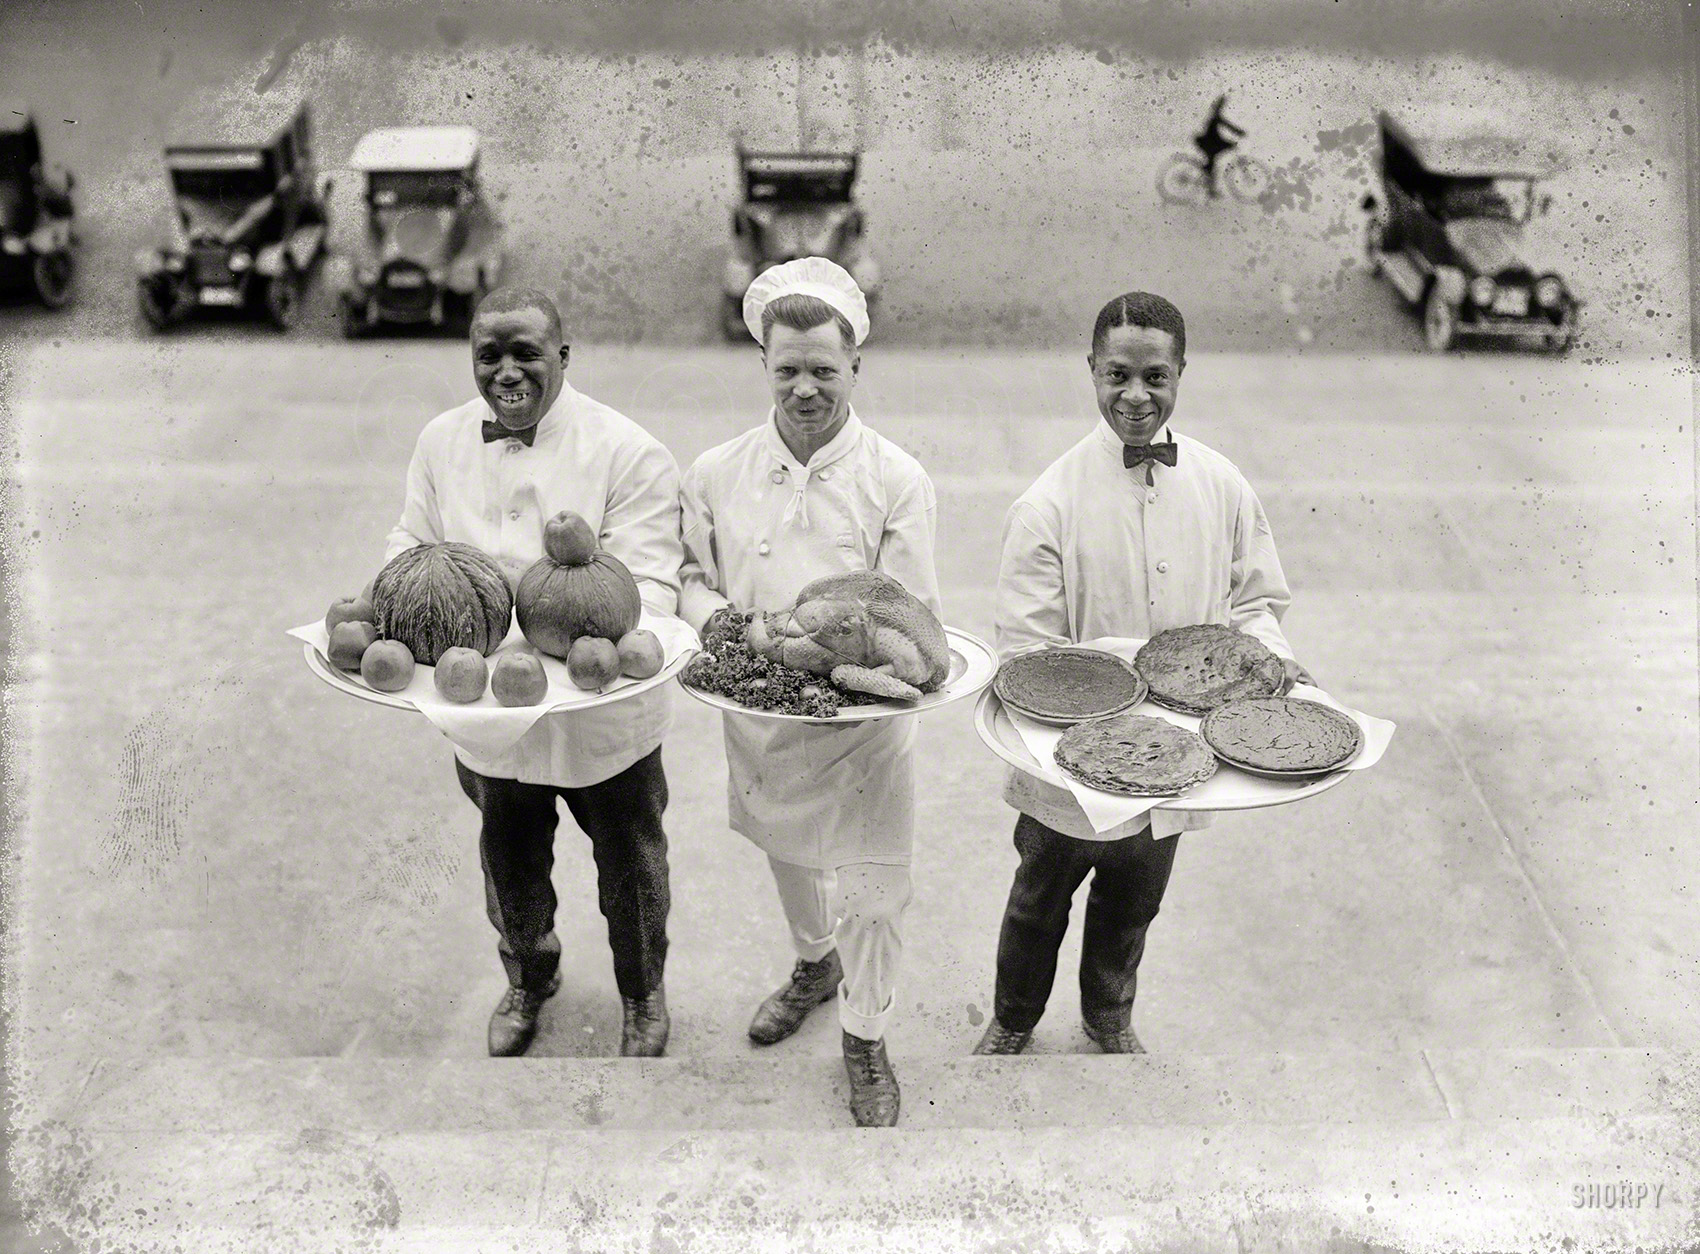 December 27, 1922. Washington, D.C. "Cooks with turkey, pies, and apples on platters." National Photo Company Collection glass negative. View full size.